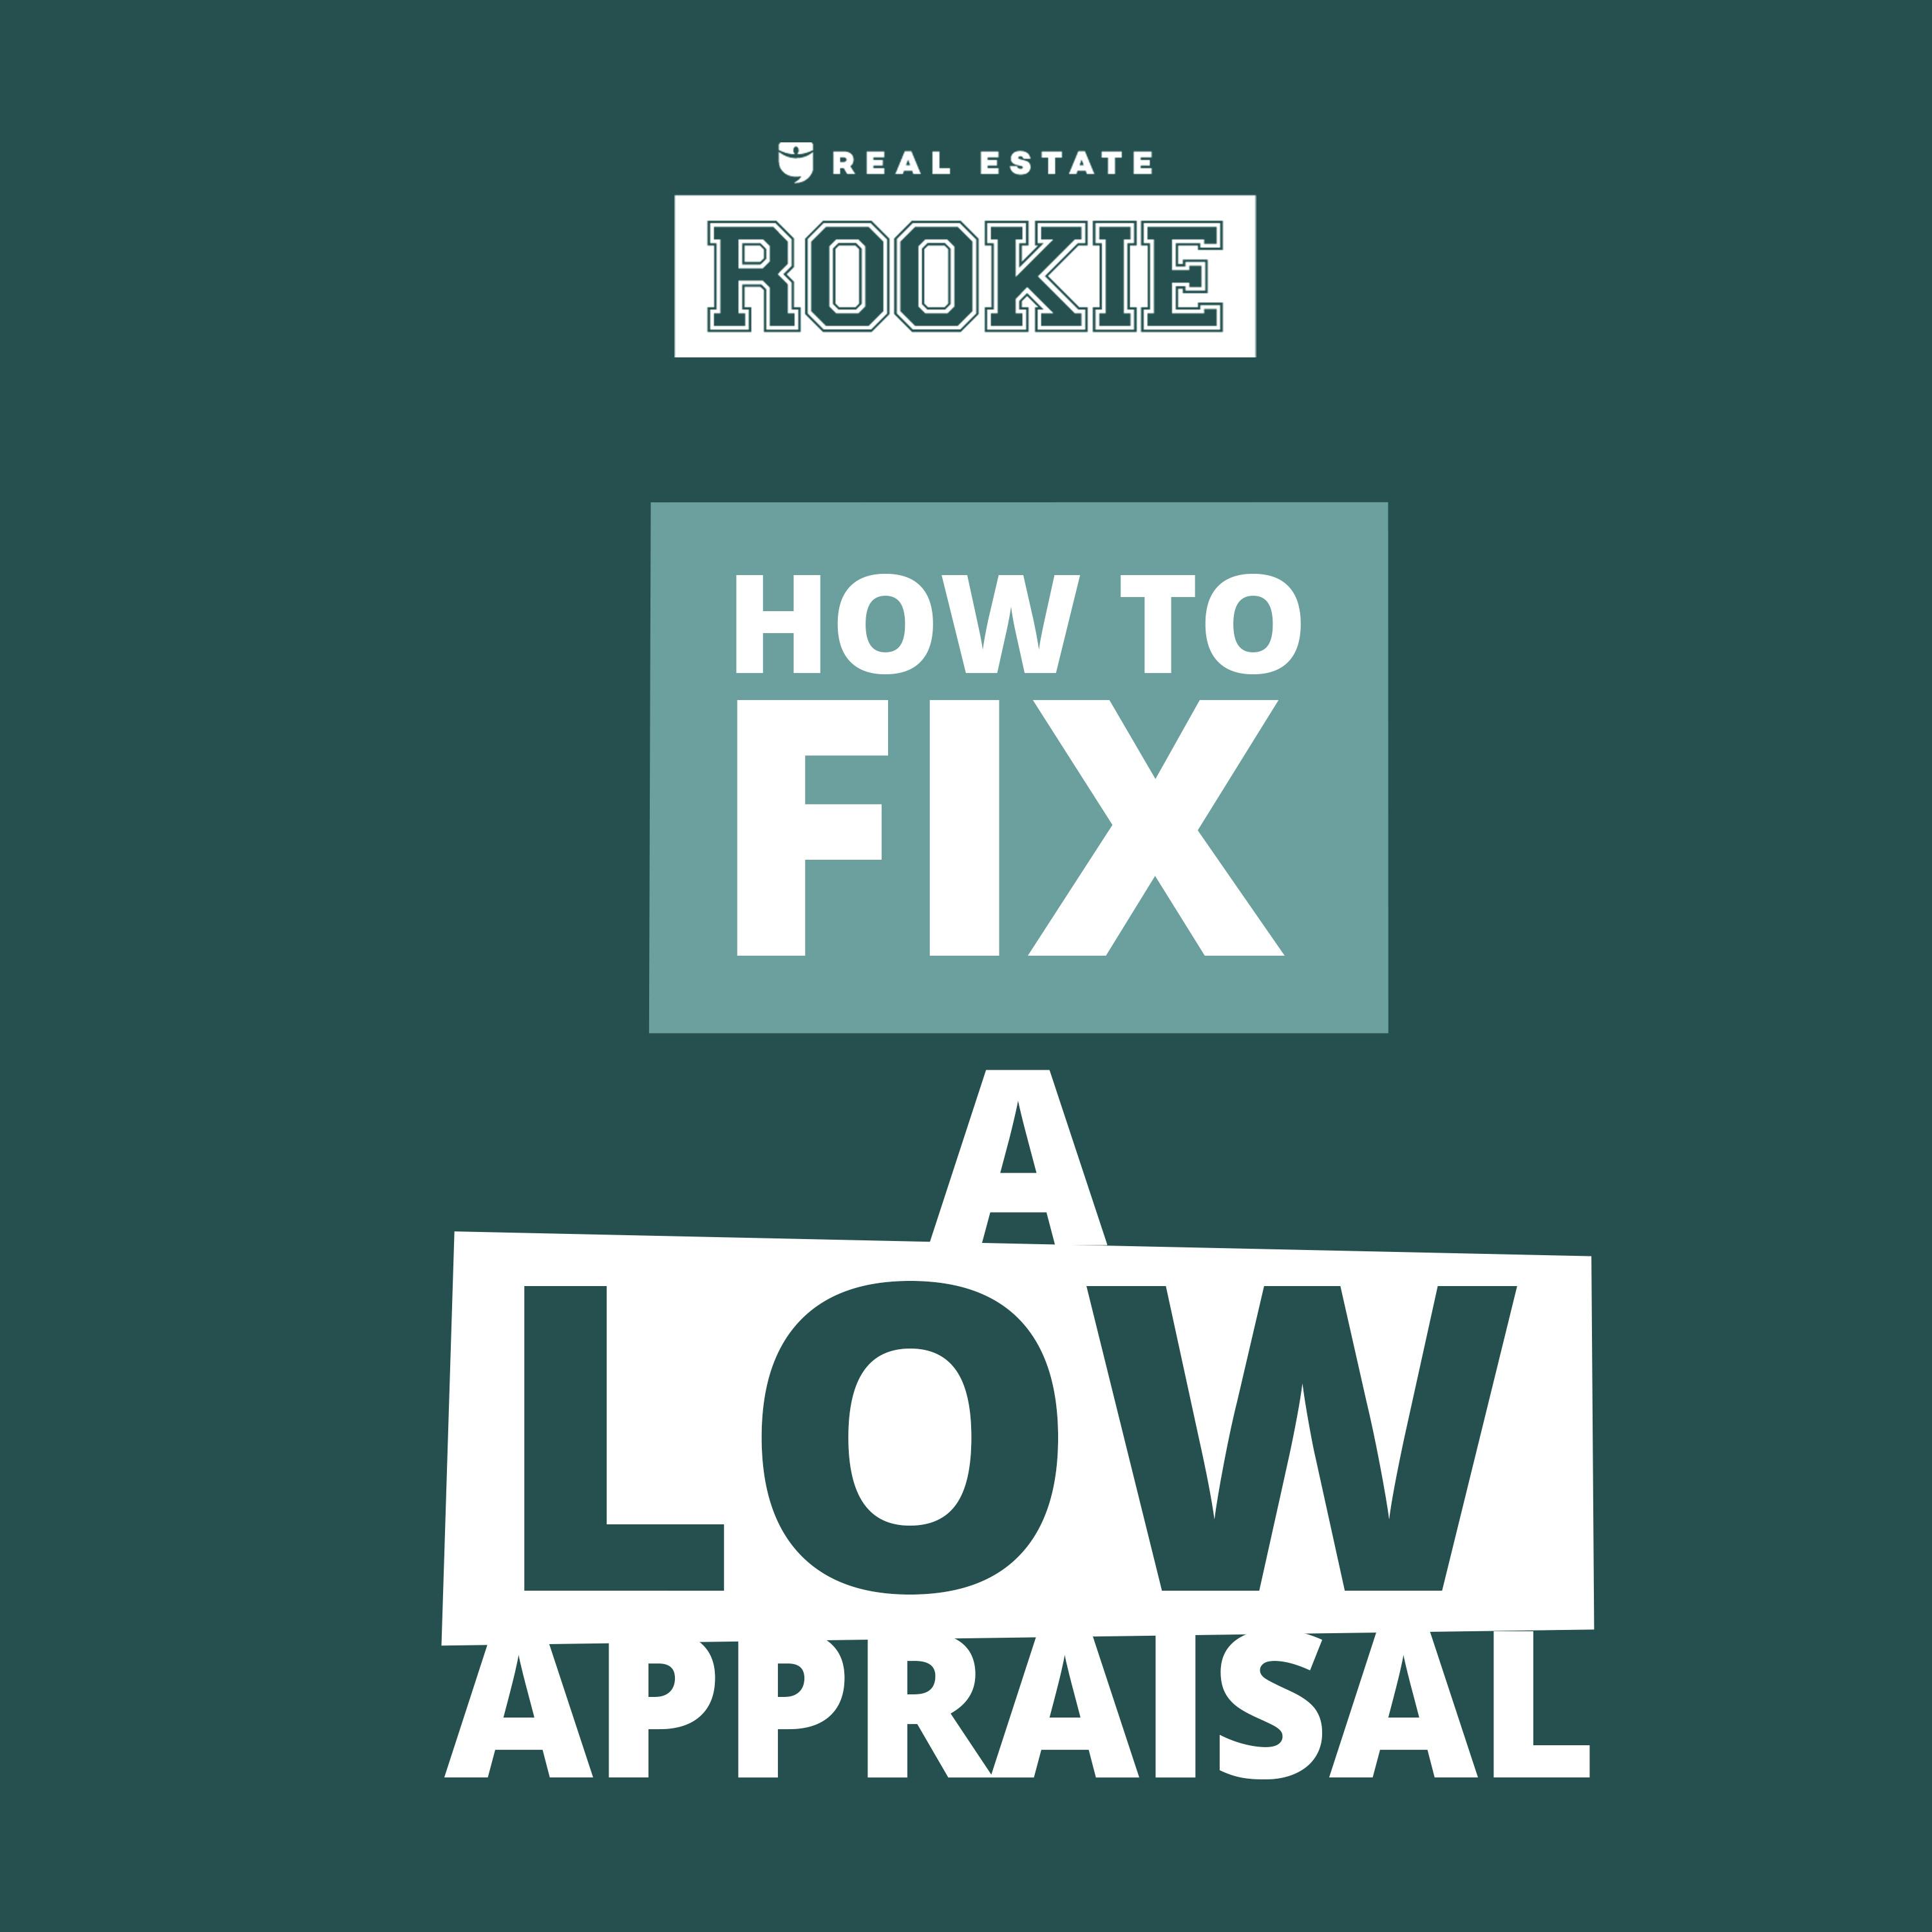 198: Rookie Reply: What To Do When an Appraisal Comes Back Low?